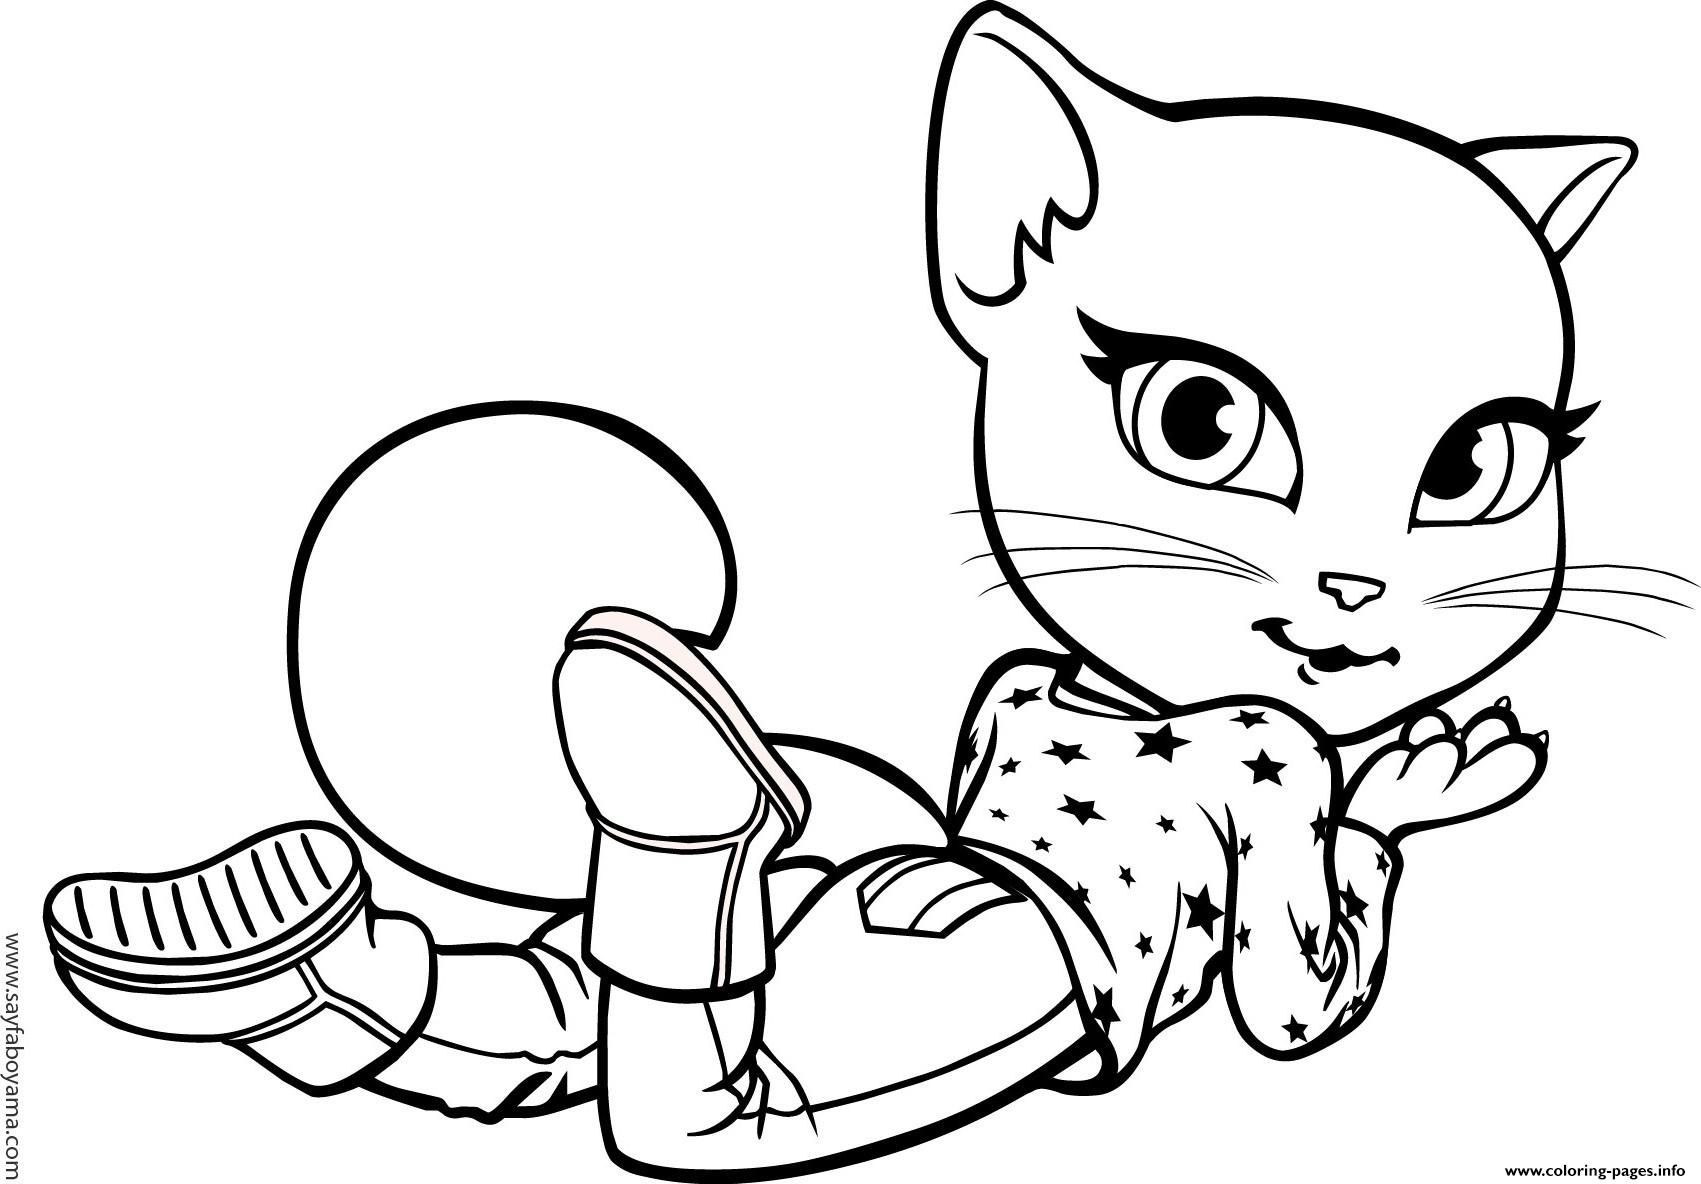 Angela Coloring Page